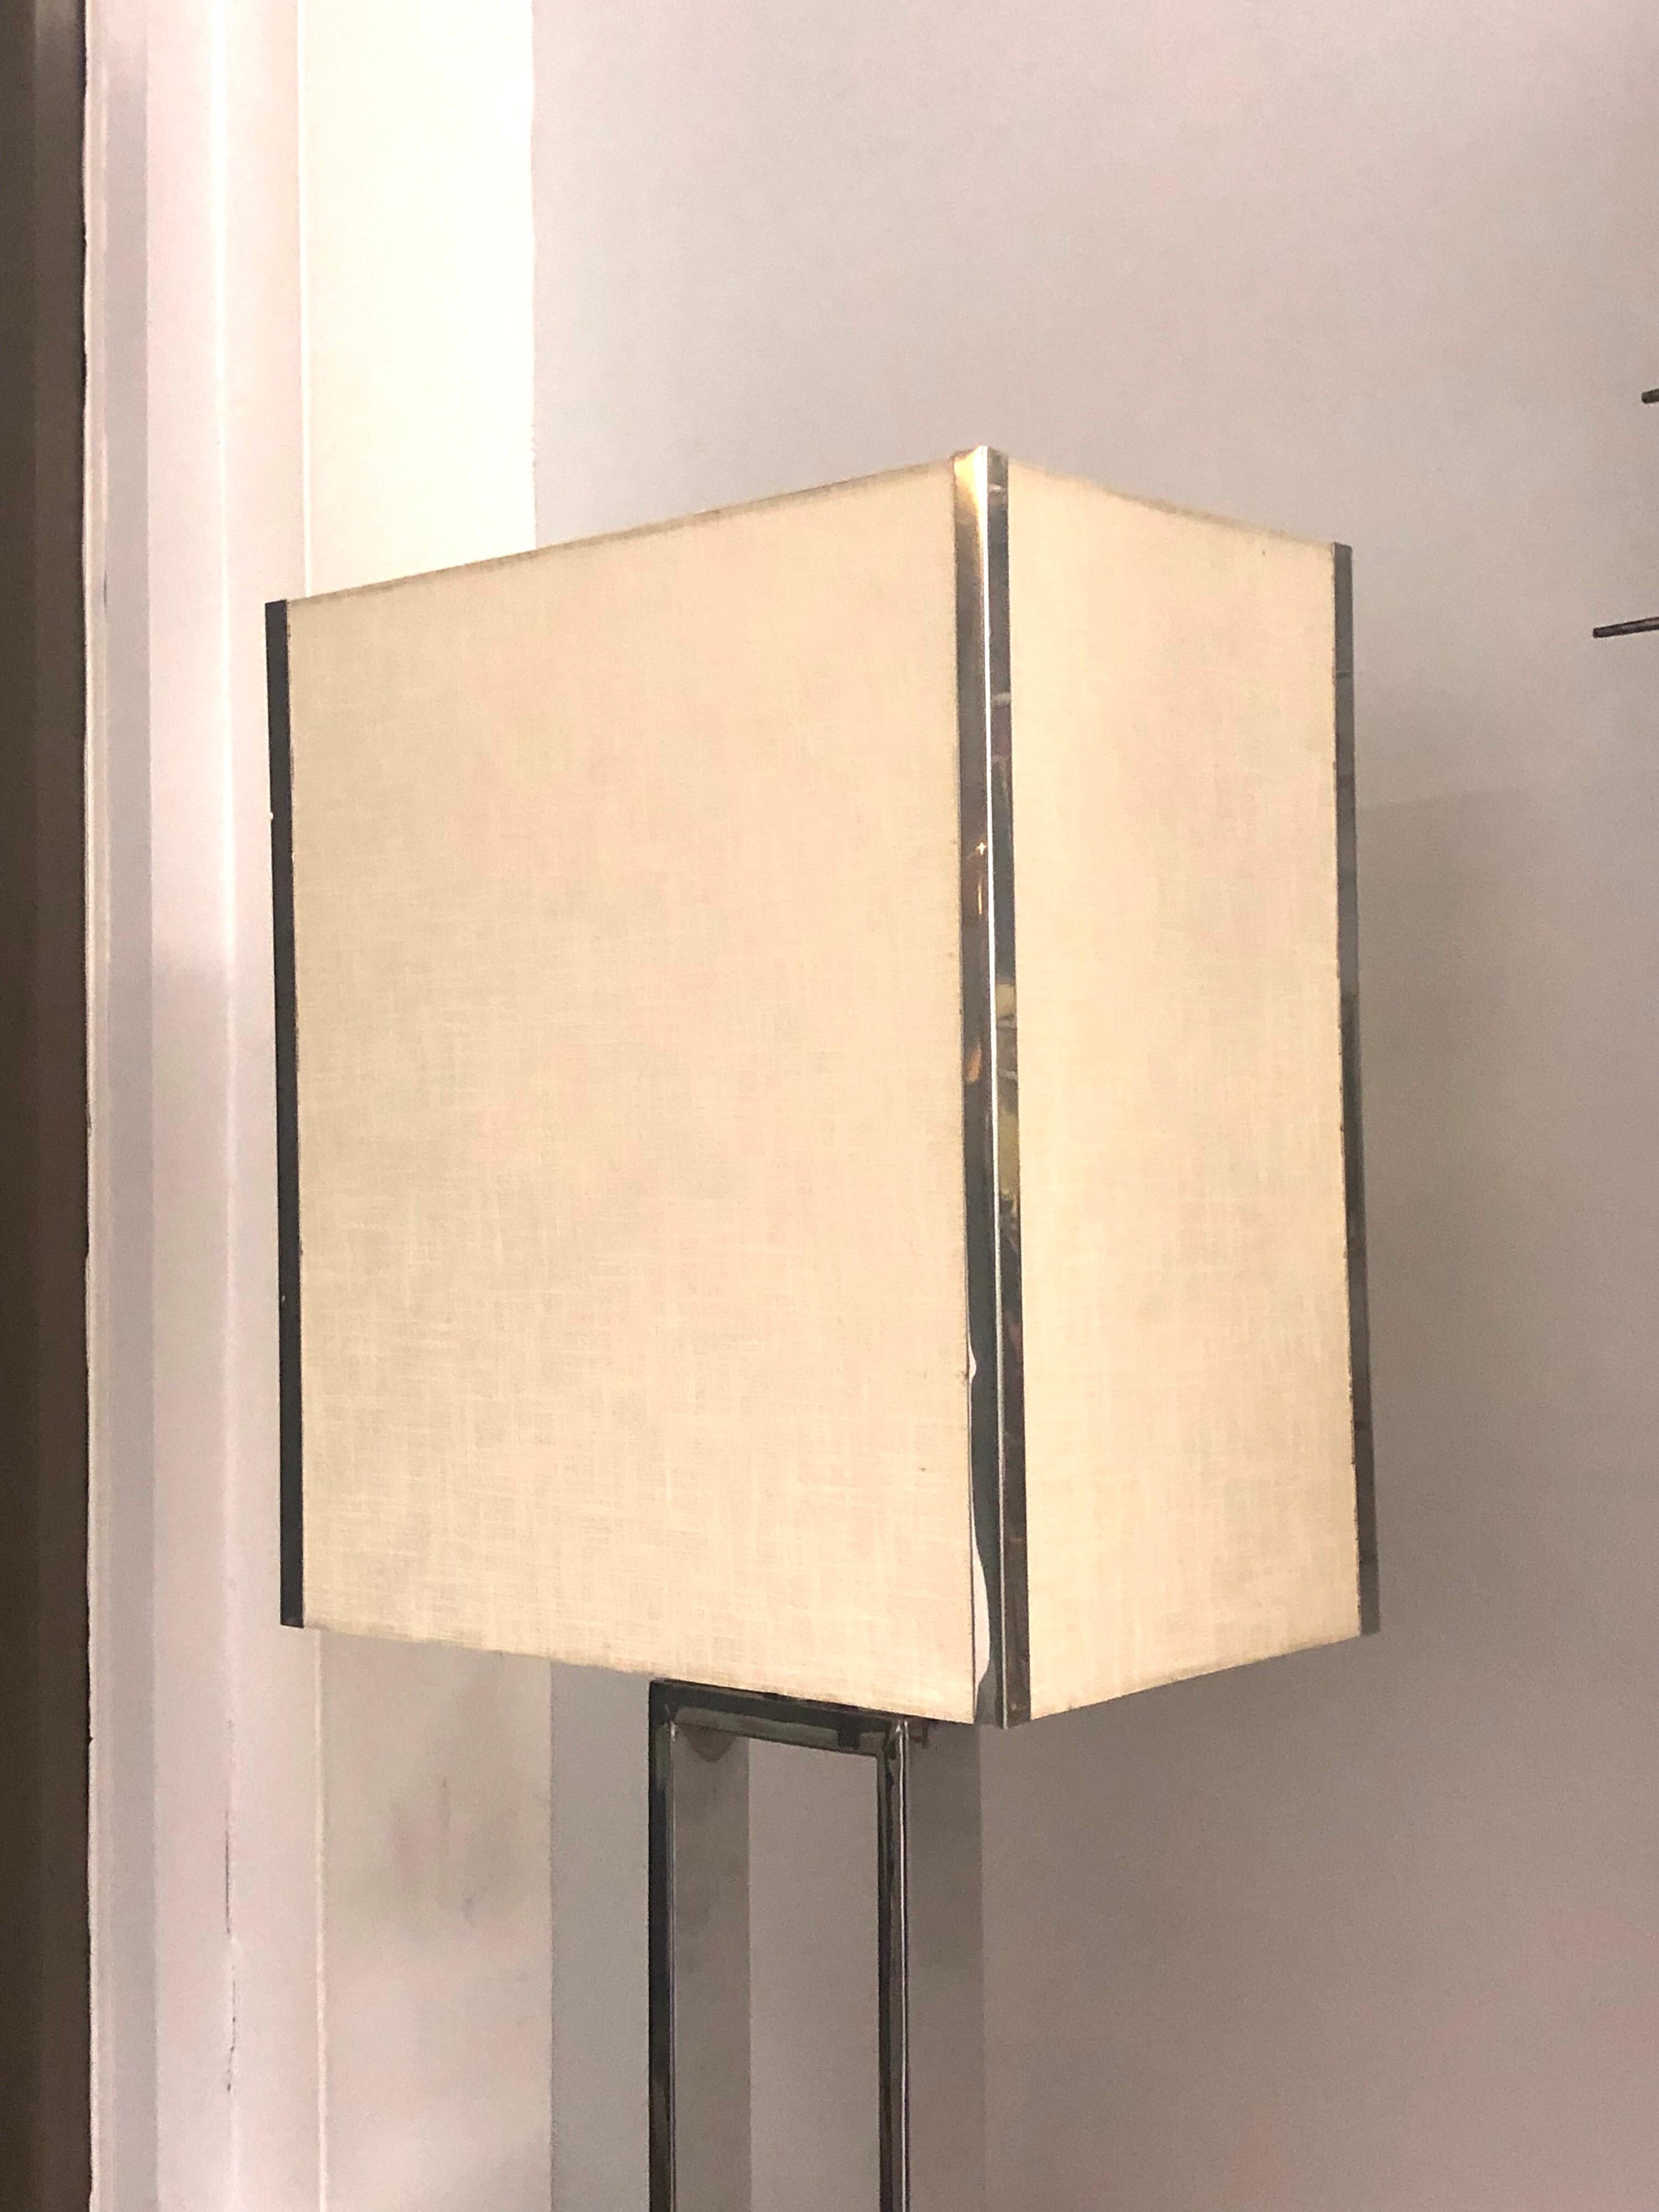 Banci Firence Pair of Italian Geometric Marble and Chrome Table Lamps For Sale 5